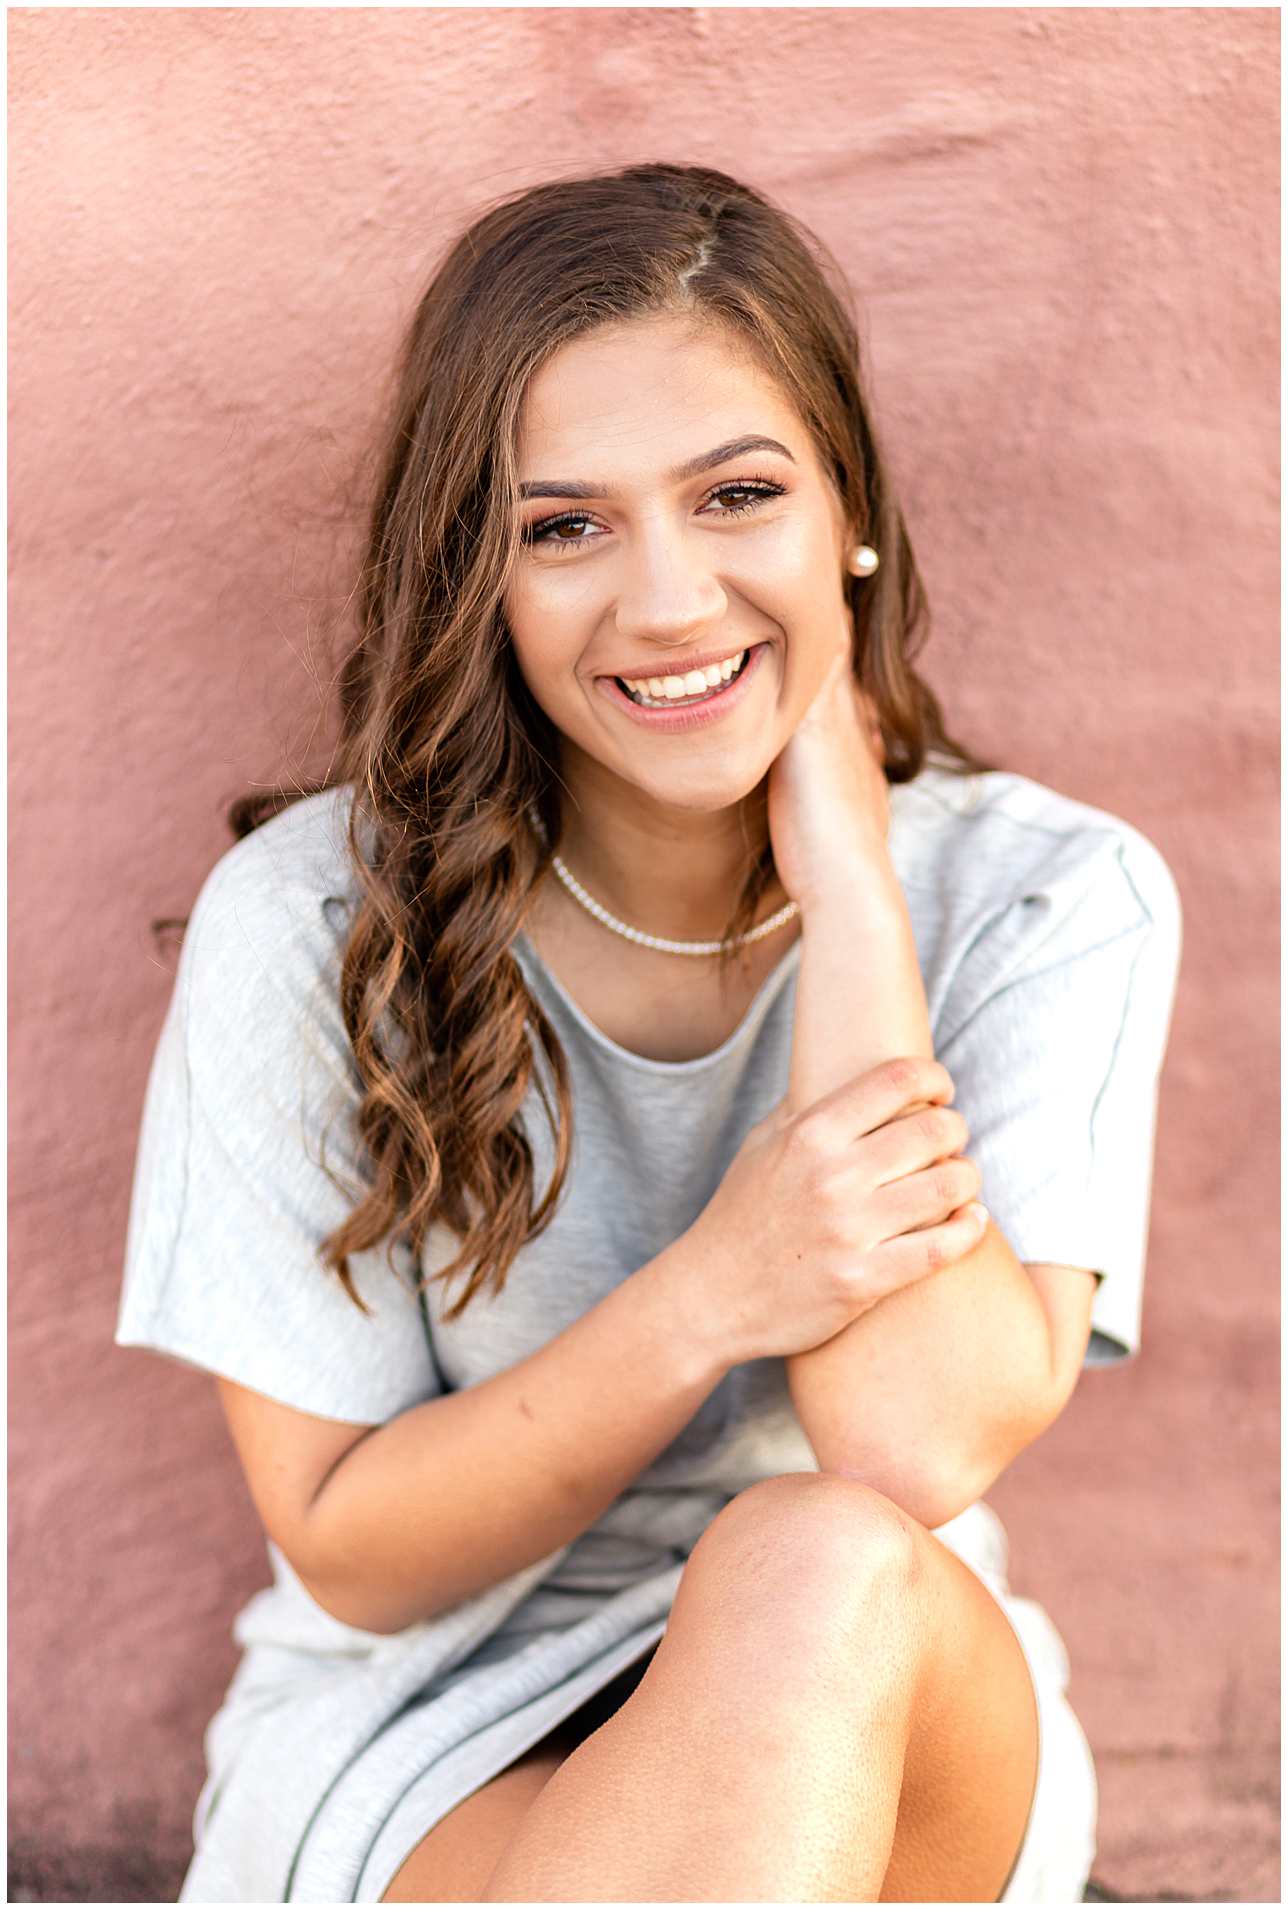 Laughing Spring Senior Photos, Classy Gray Senior Picture Outfit Romper, Pink Wall Senior Portraits